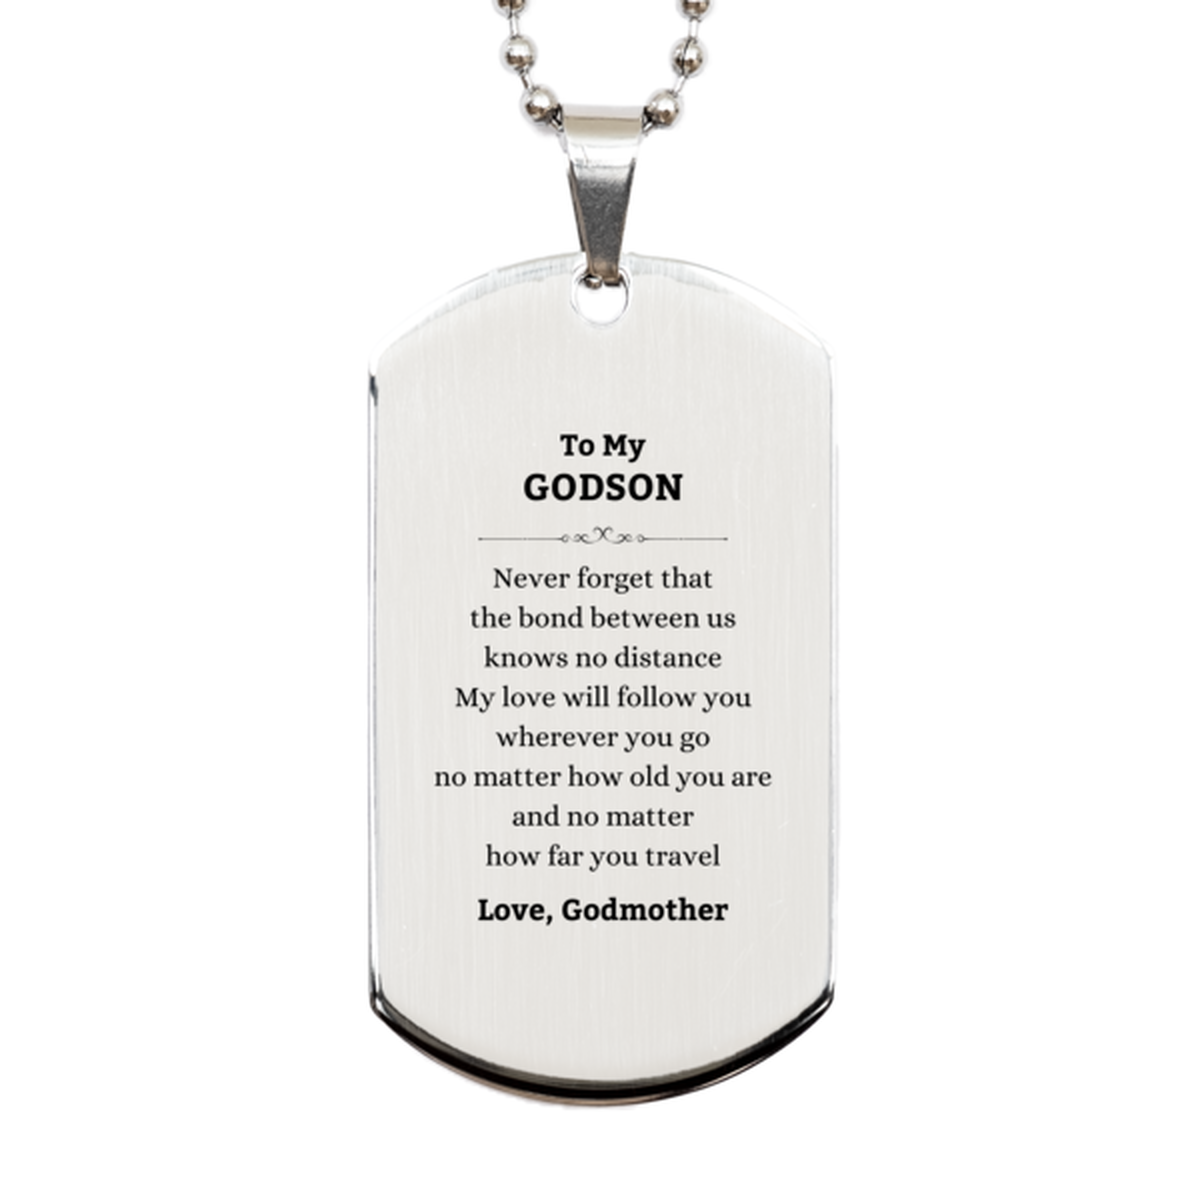 Godson Birthday Gifts from Godmother, Adjustable Silver Dog Tag for Godson Christmas Graduation Unique Gifts Godson Never forget that the bond between us knows no distance. Love, Godmother